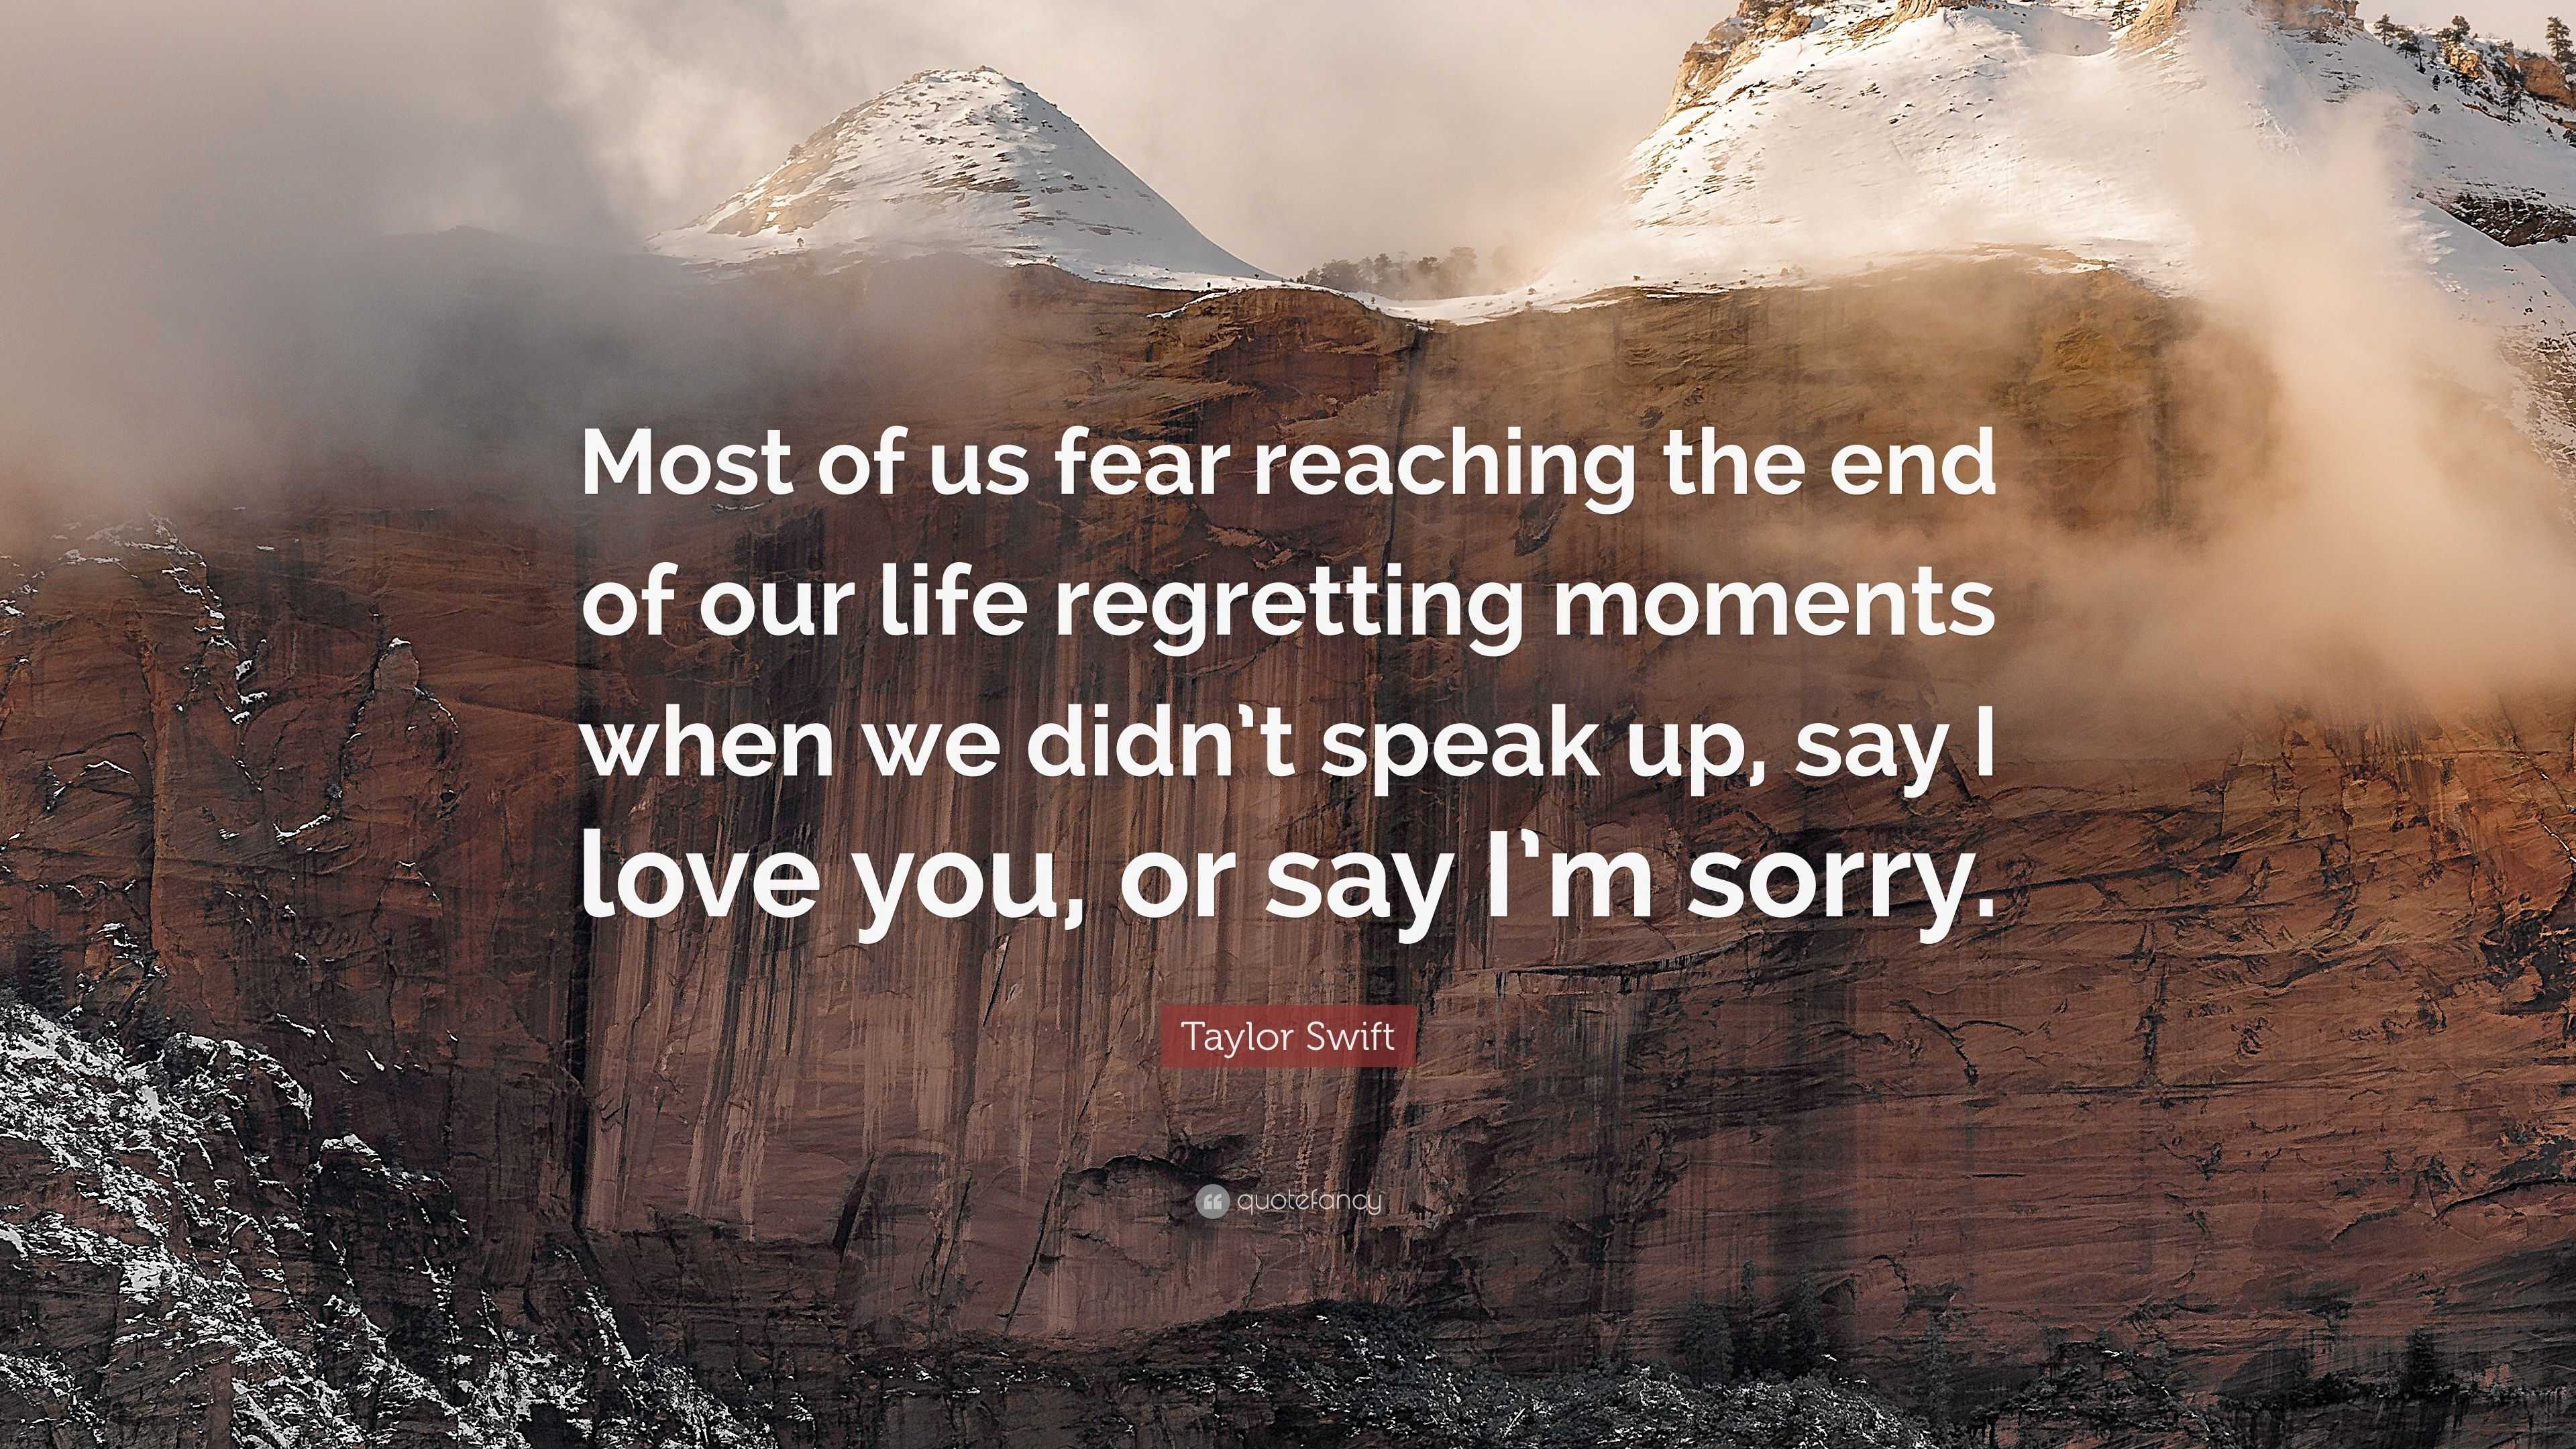 Taylor Swift Quote “Most of us fear reaching the end of our life regretting